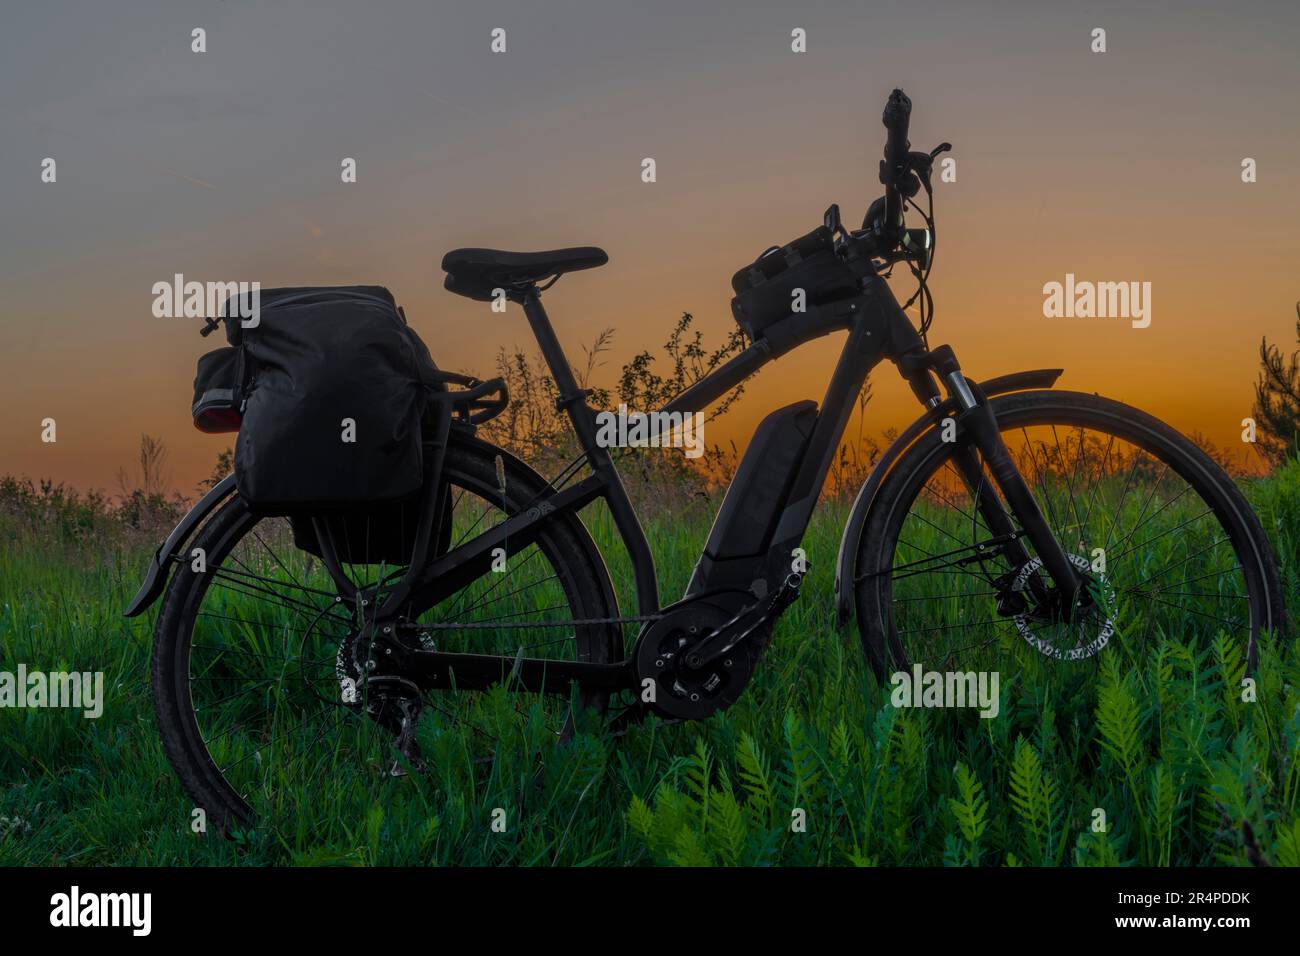 Electric bike with black bag on overgrown meadow with after sunset orange sky Stock Photo